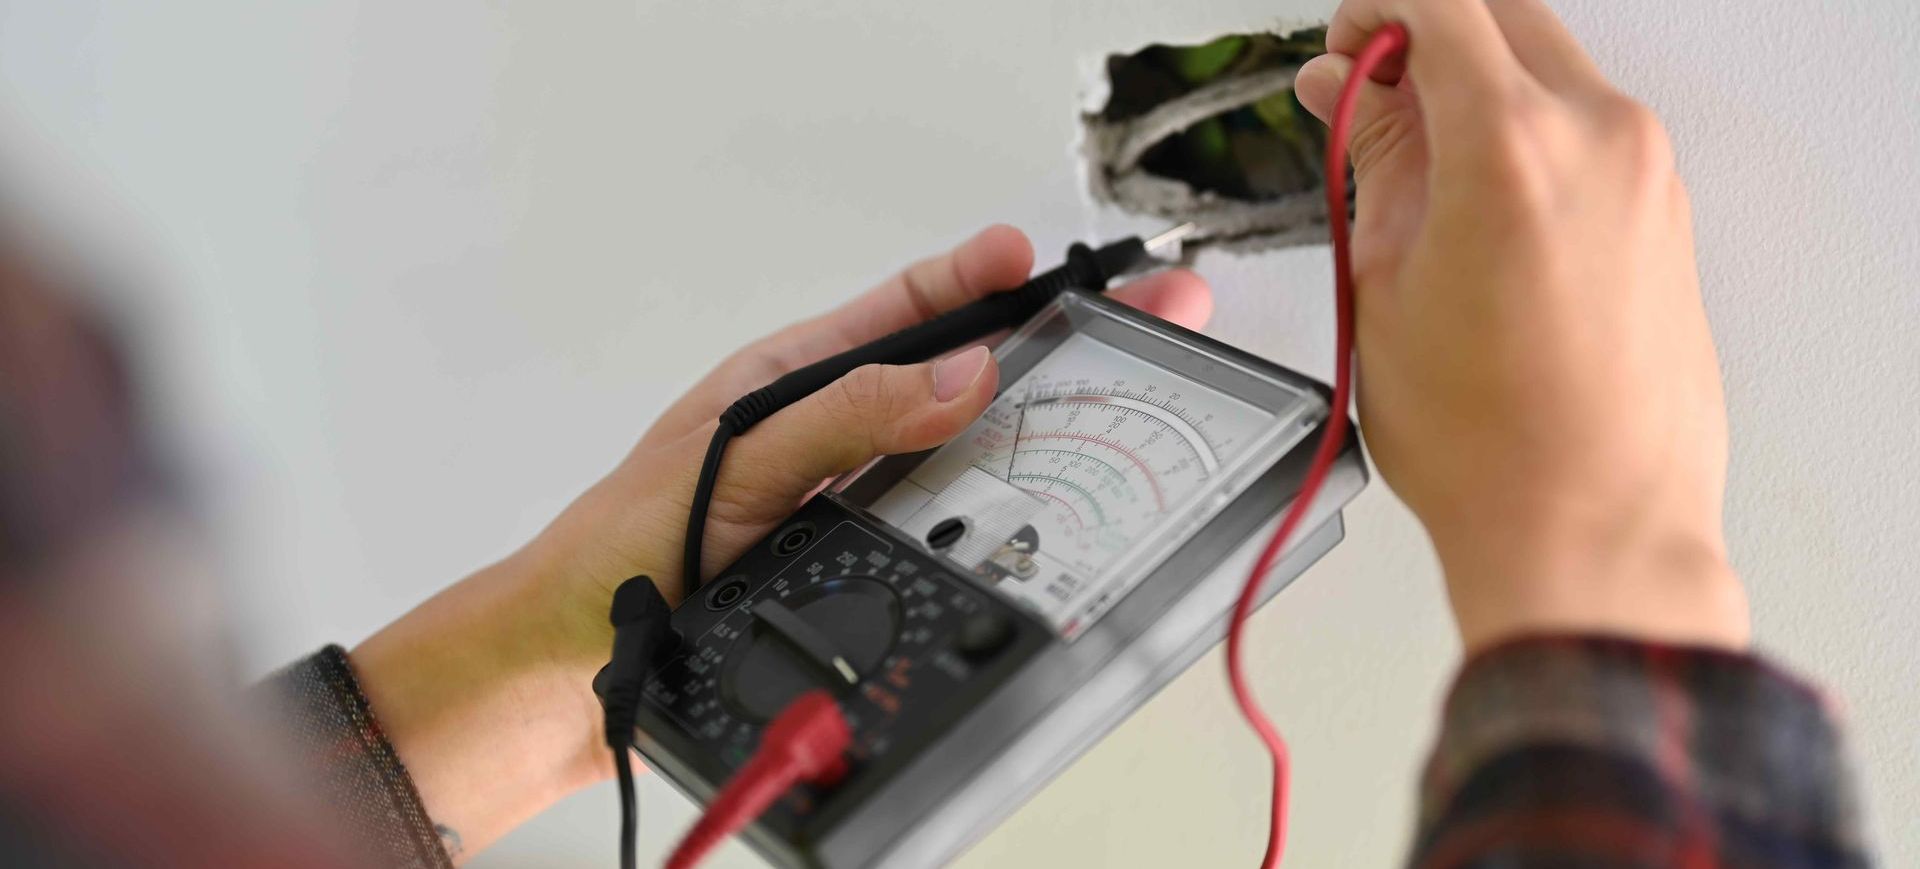 Electrician Testing Electrical Lines For Integrity In Home For Sale